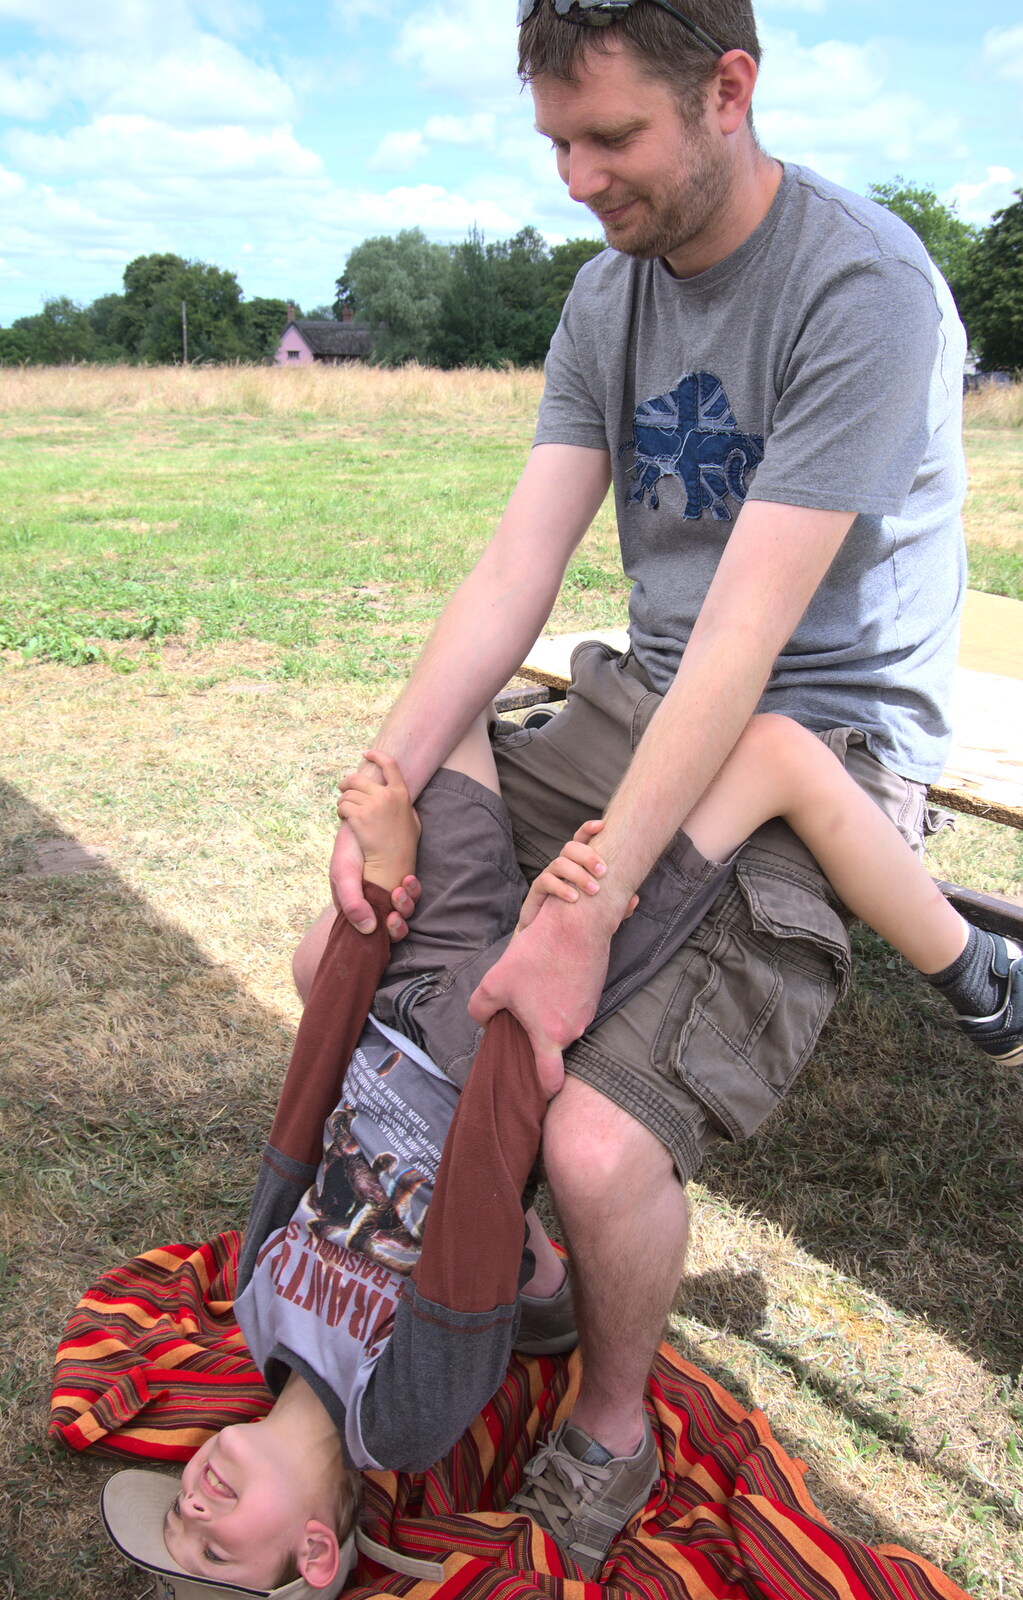 The Boy Phil does some child tormenting from A Village Hog Roast, Little Green, Thrandeston, Suffolk - 24th June 2018